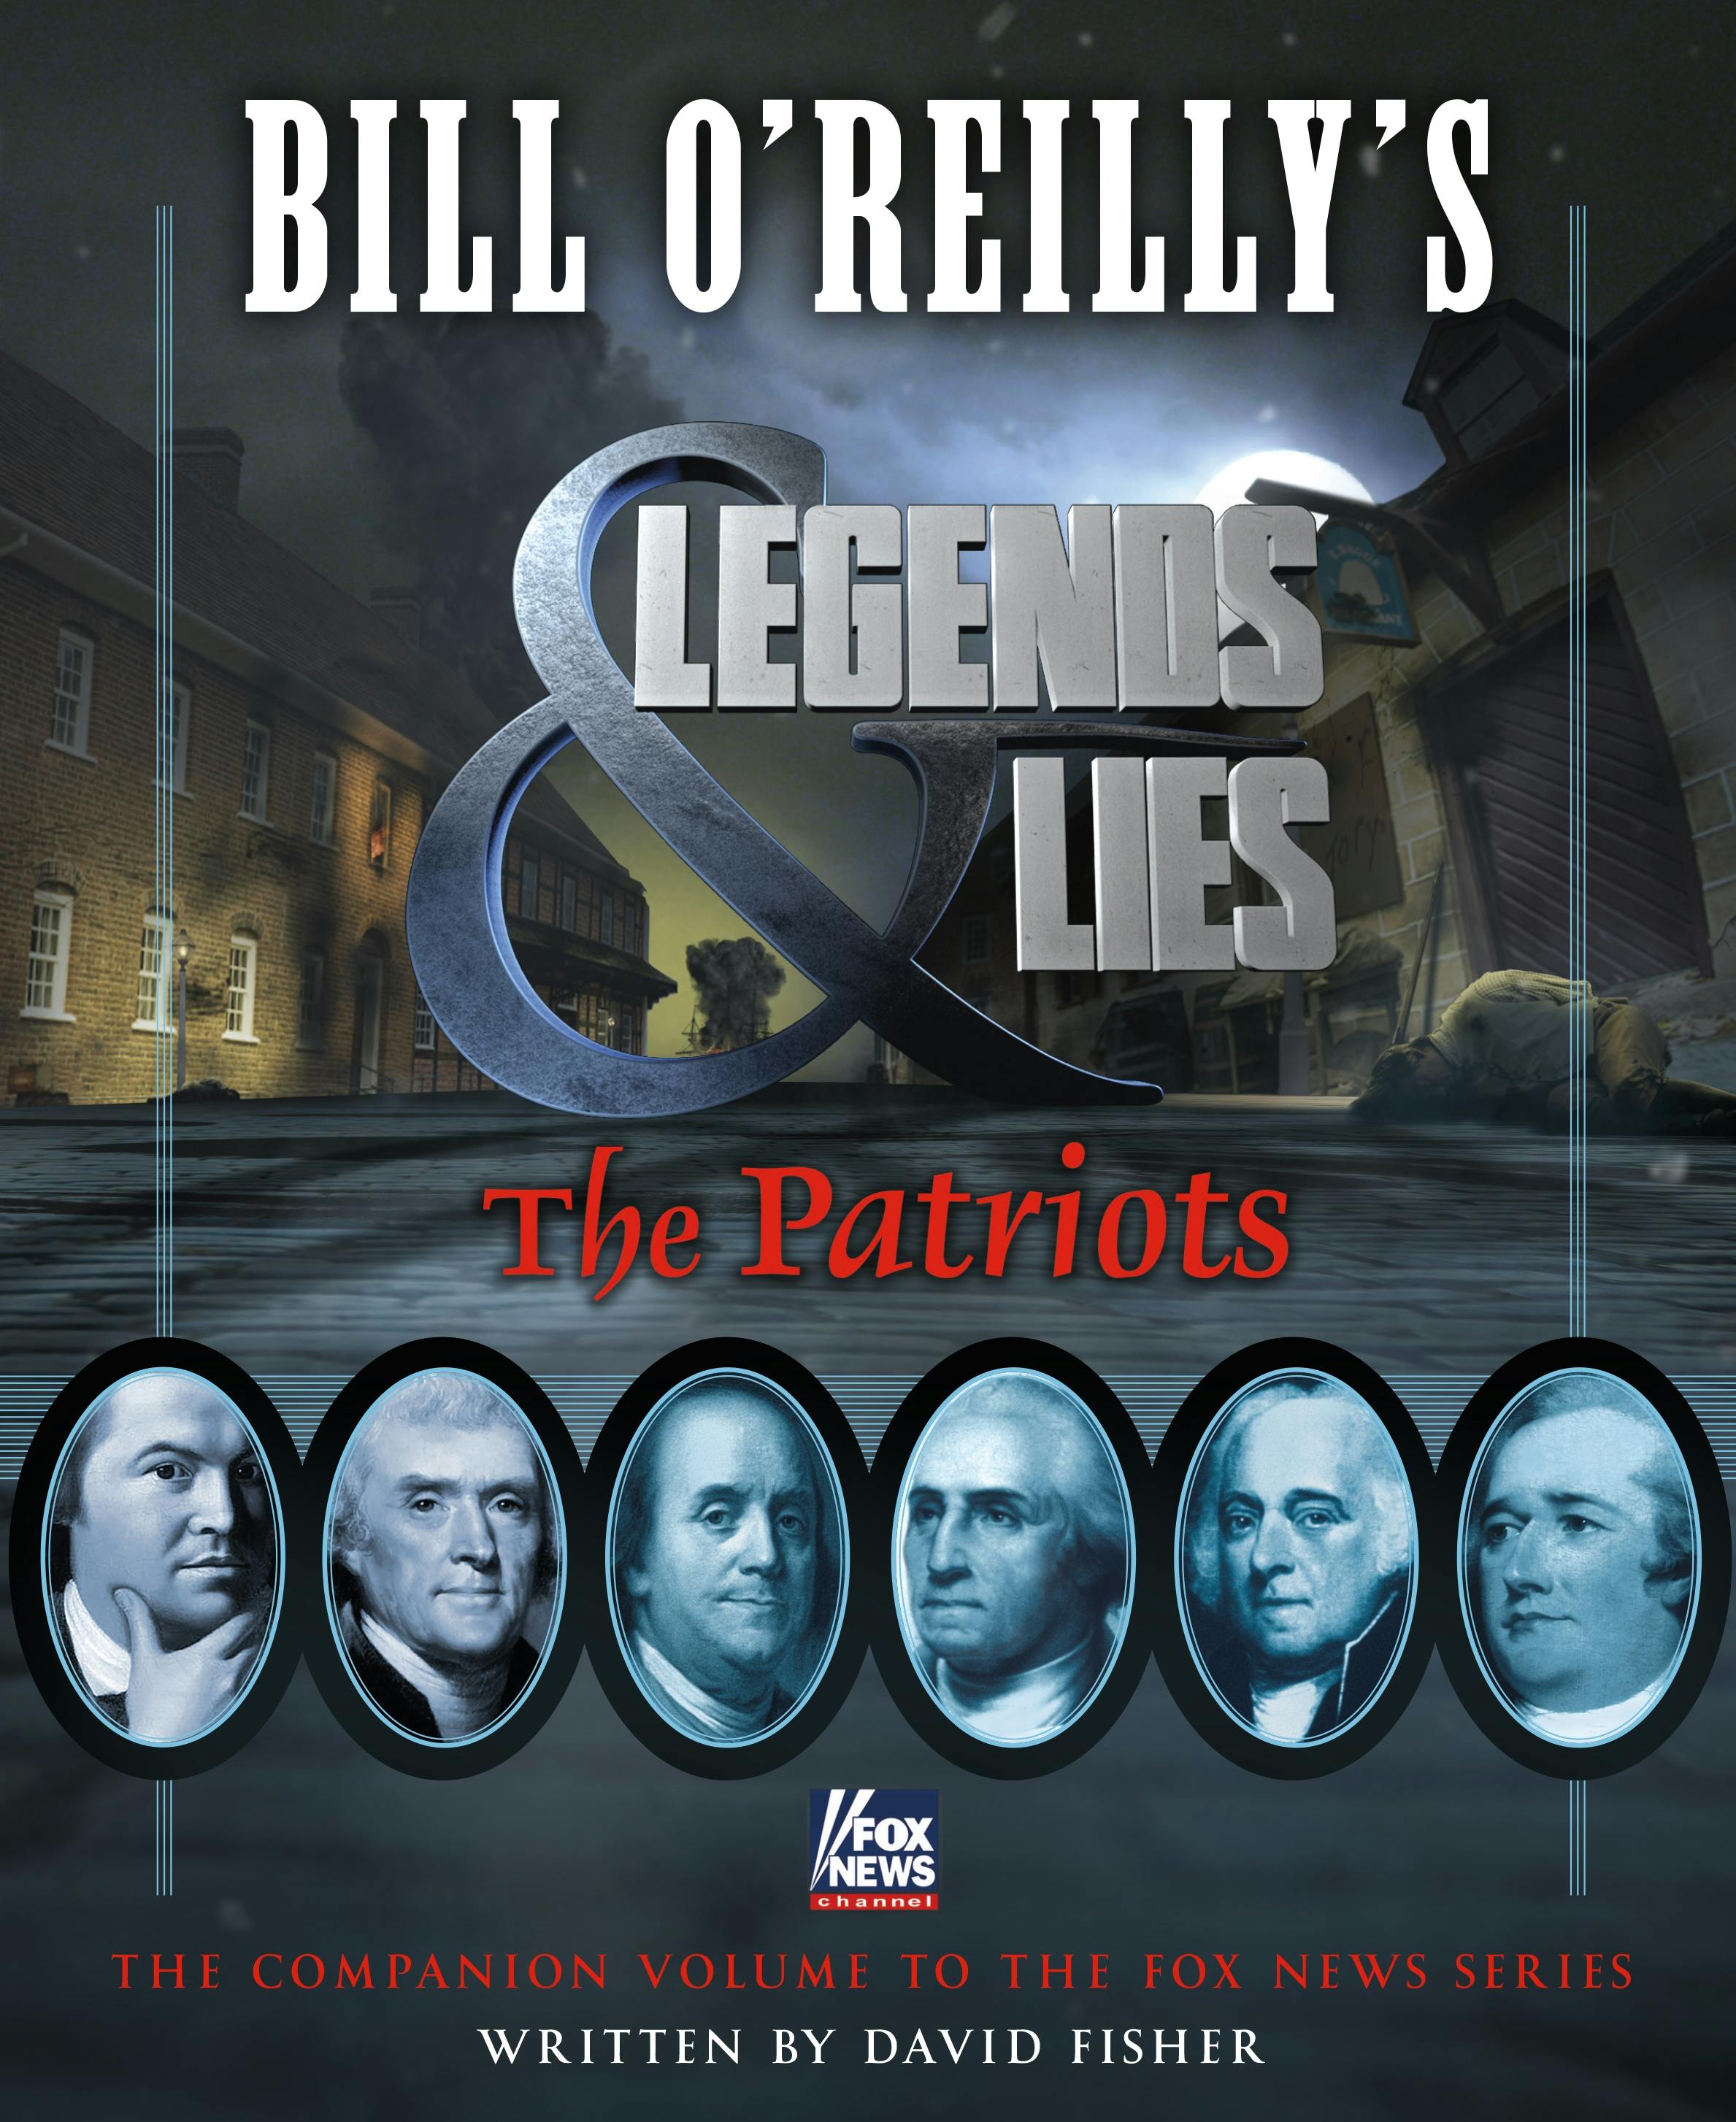 Image of Bill O'Reilly's Legends and Lies: The Patriots